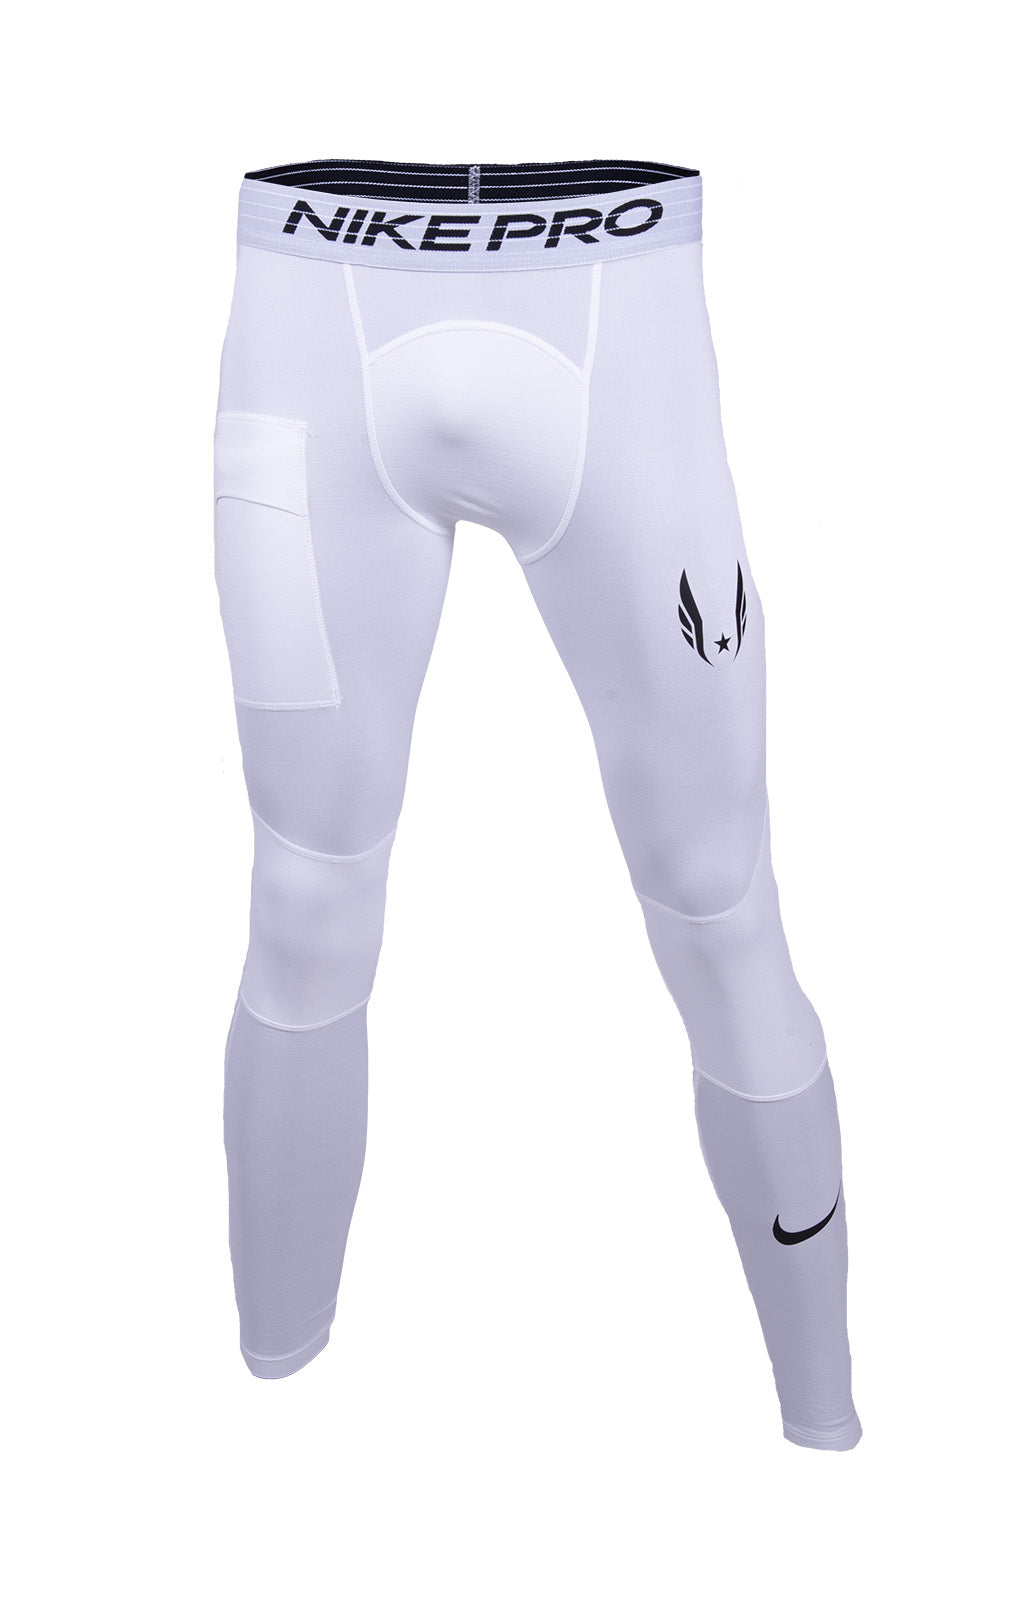 All Products – Tagged Tights– Team USATF Store